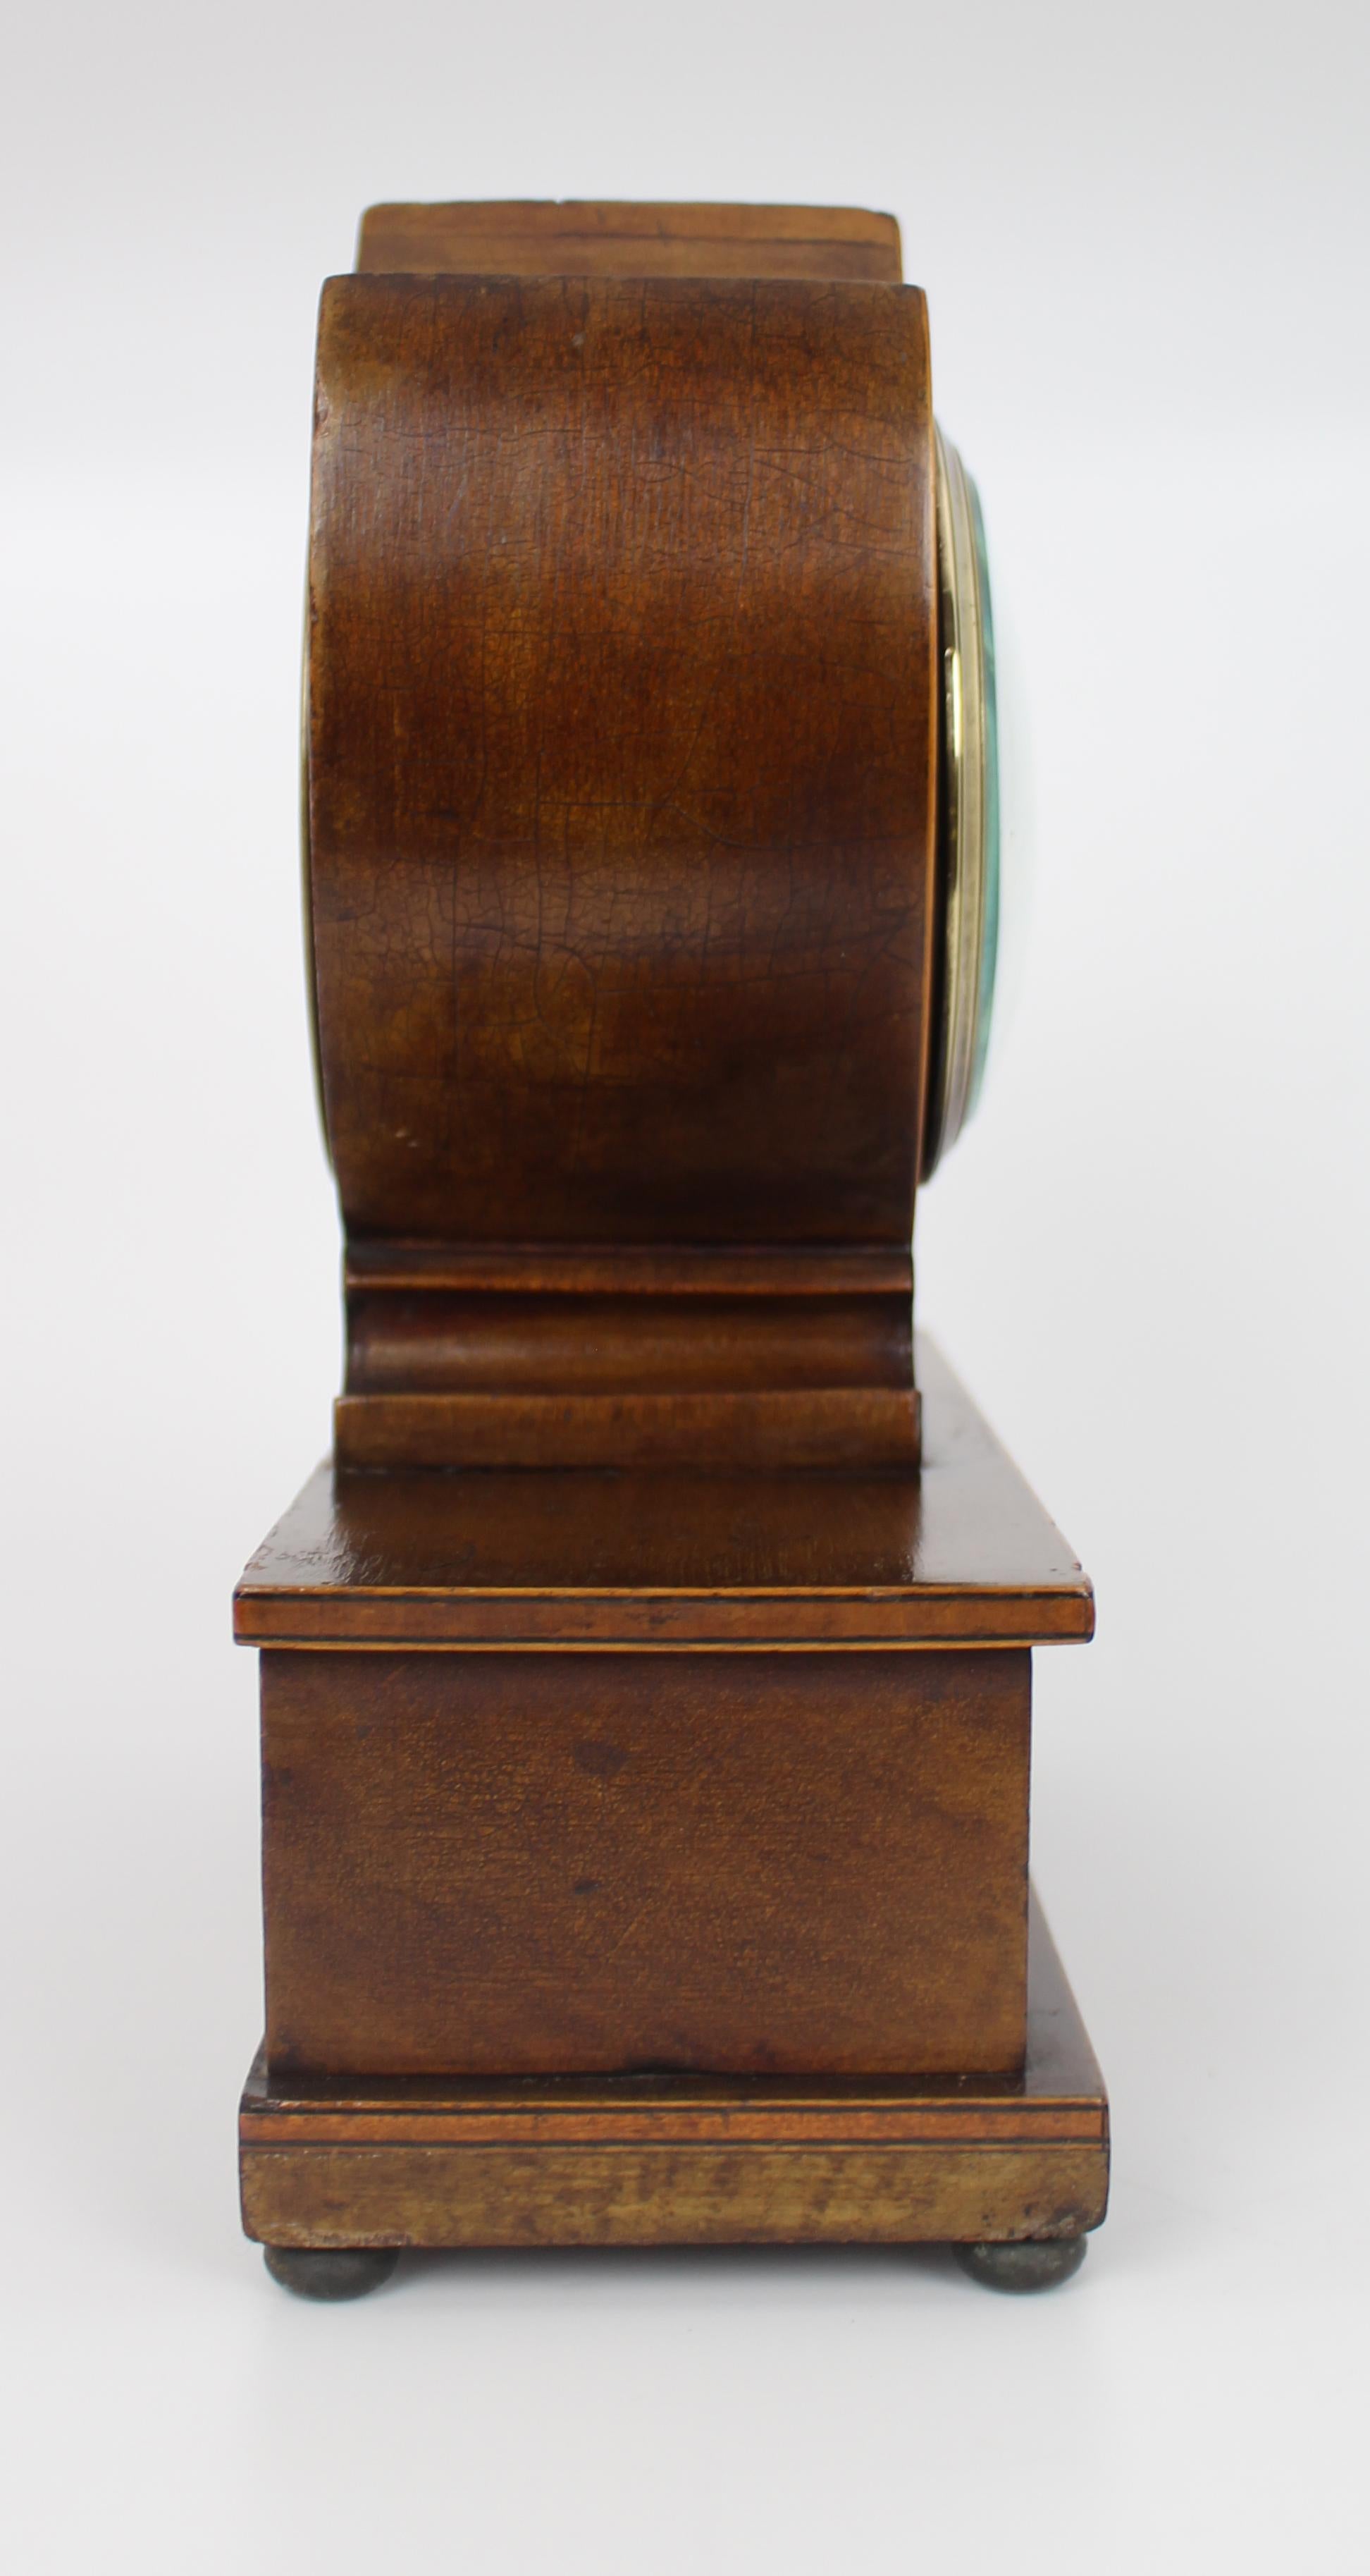 British Elegant Inlaid Mahogany Mantle Clock by Wray, Son & Perry c.1900 For Sale